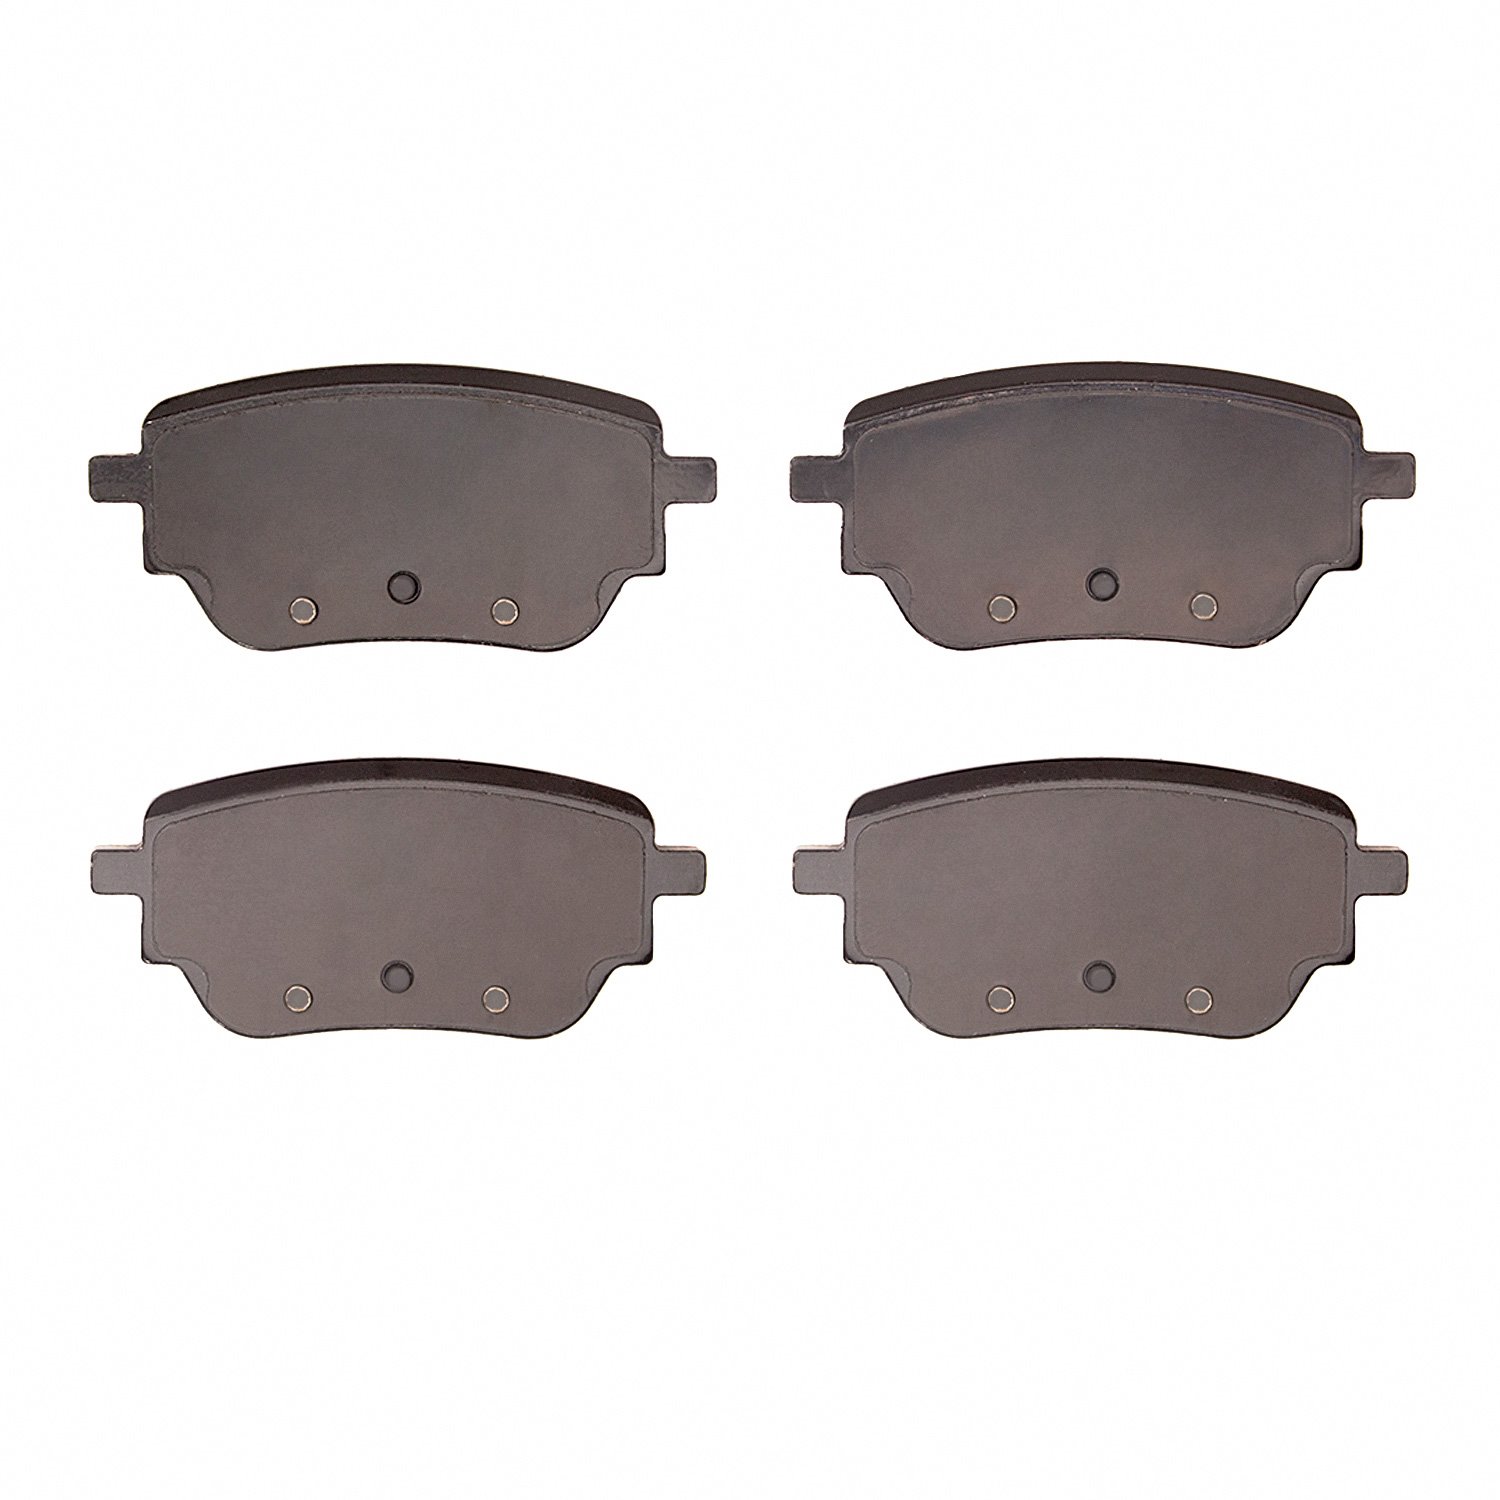 1310-2207-00 3000-Series Ceramic Brake Pads, Fits Select Mercedes-Benz, Position: Rear